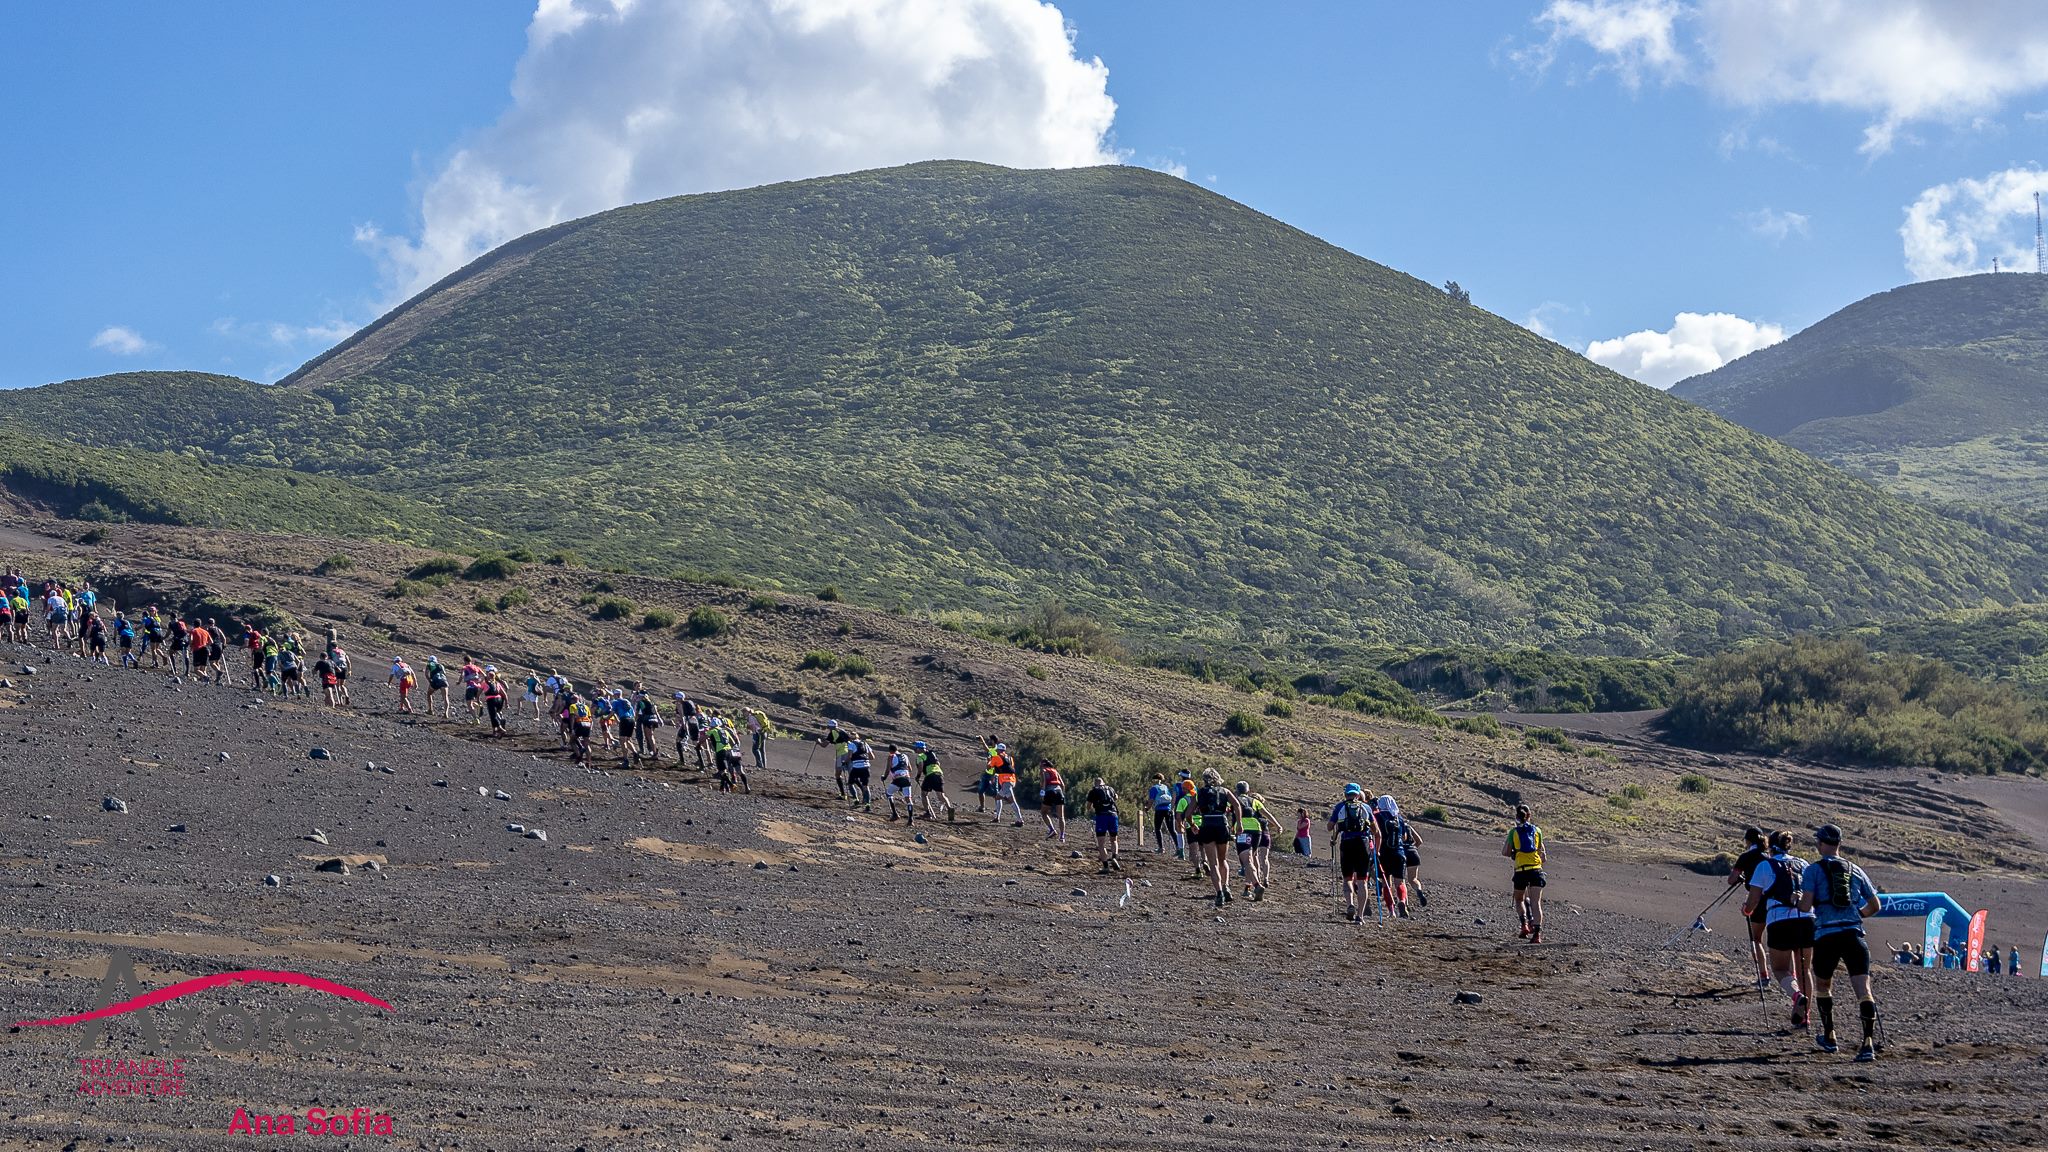 azores trail running